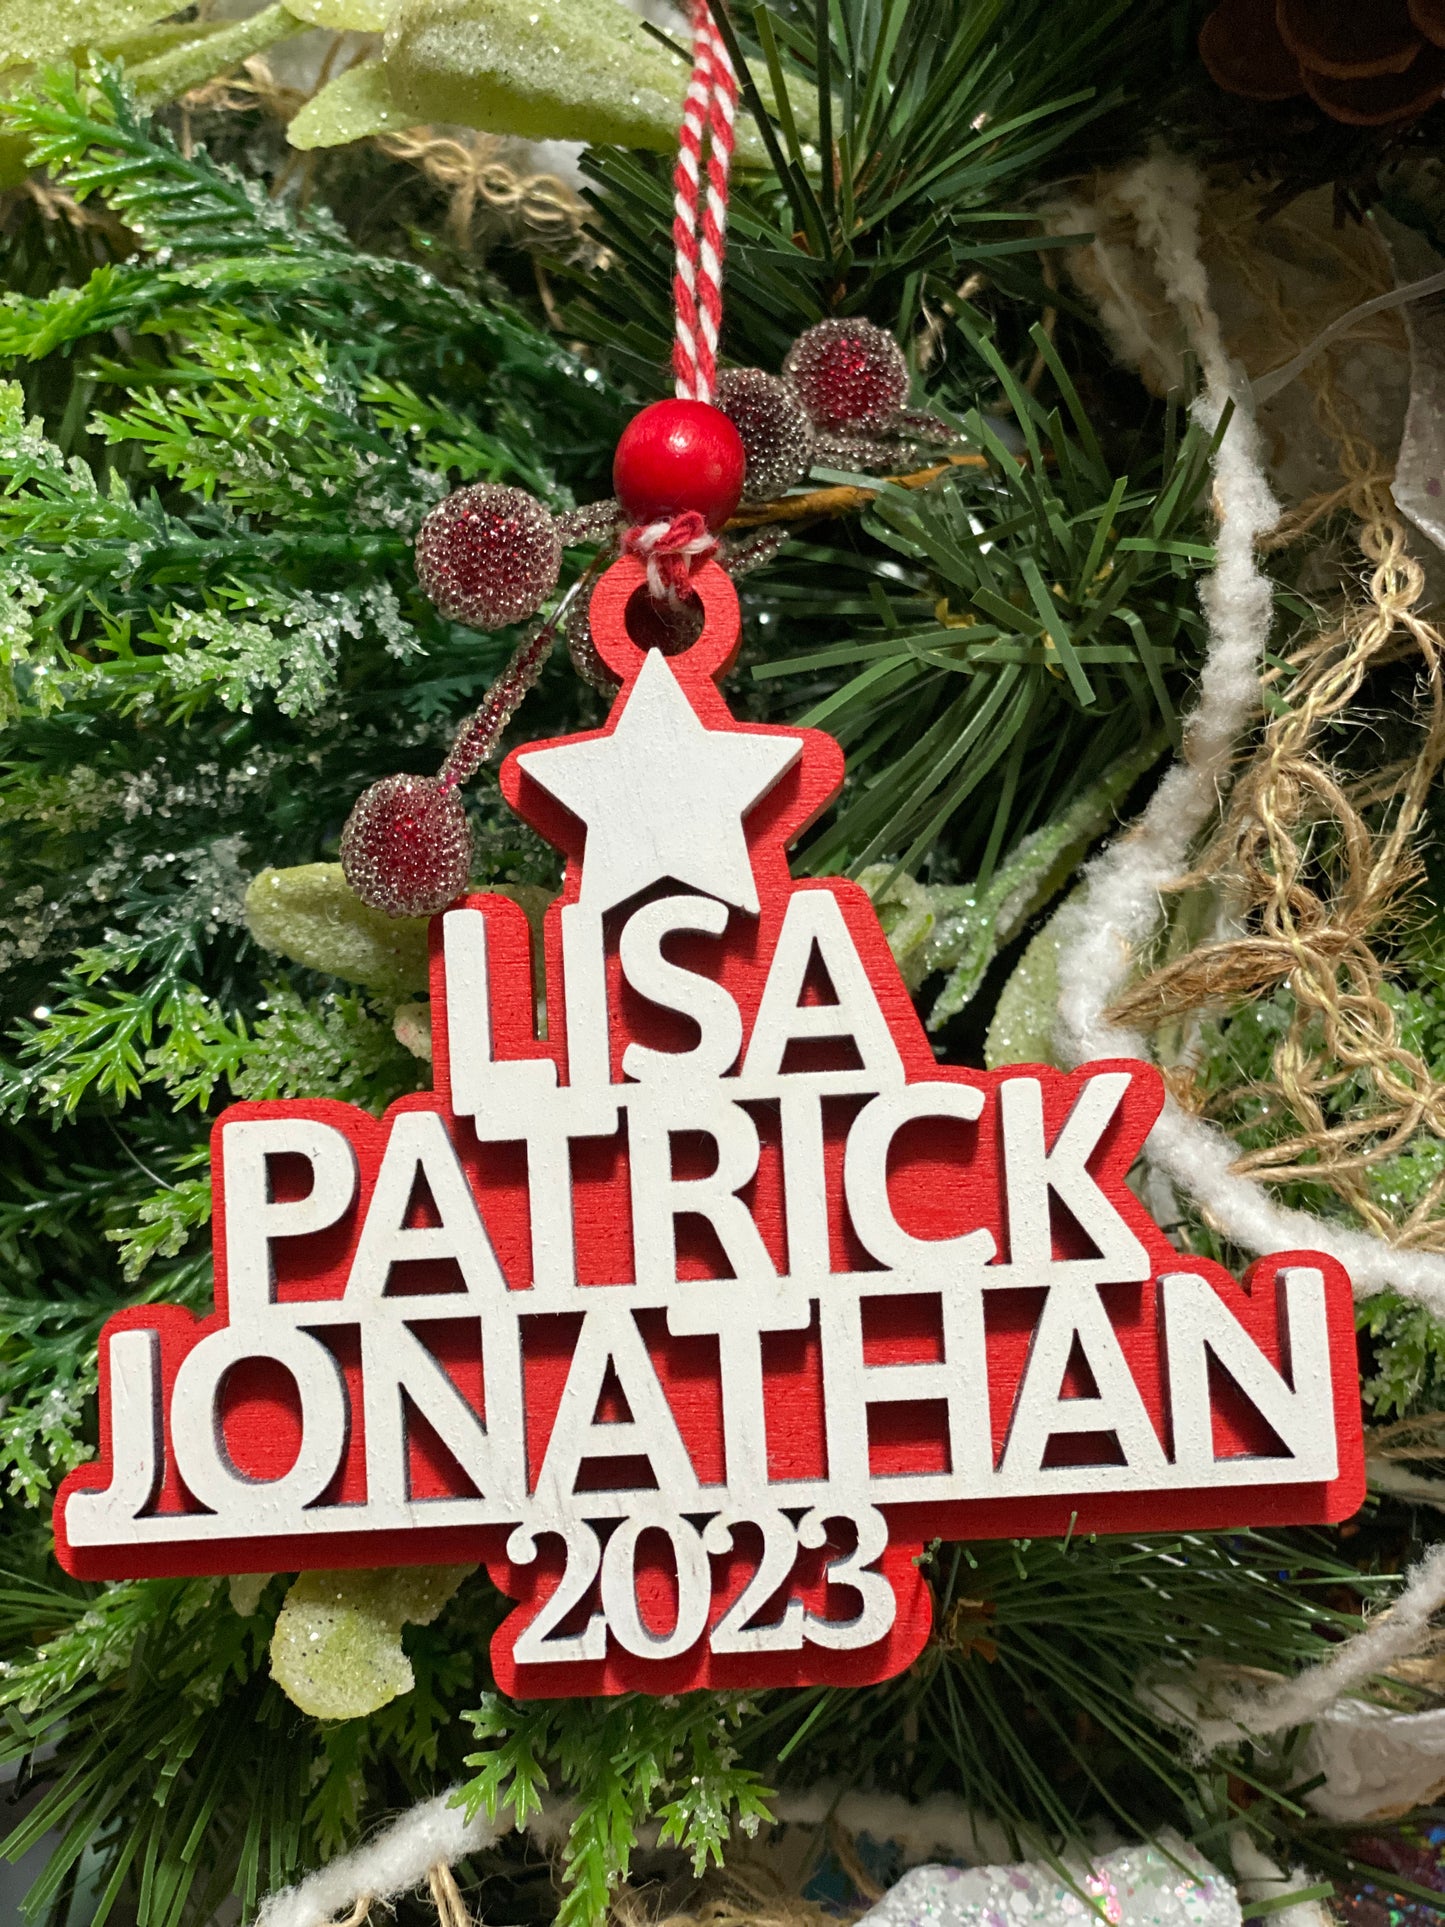 Family Names Christmas Tree Ornament, Gift Tags, Personalized Christmas Holiday Ornaments